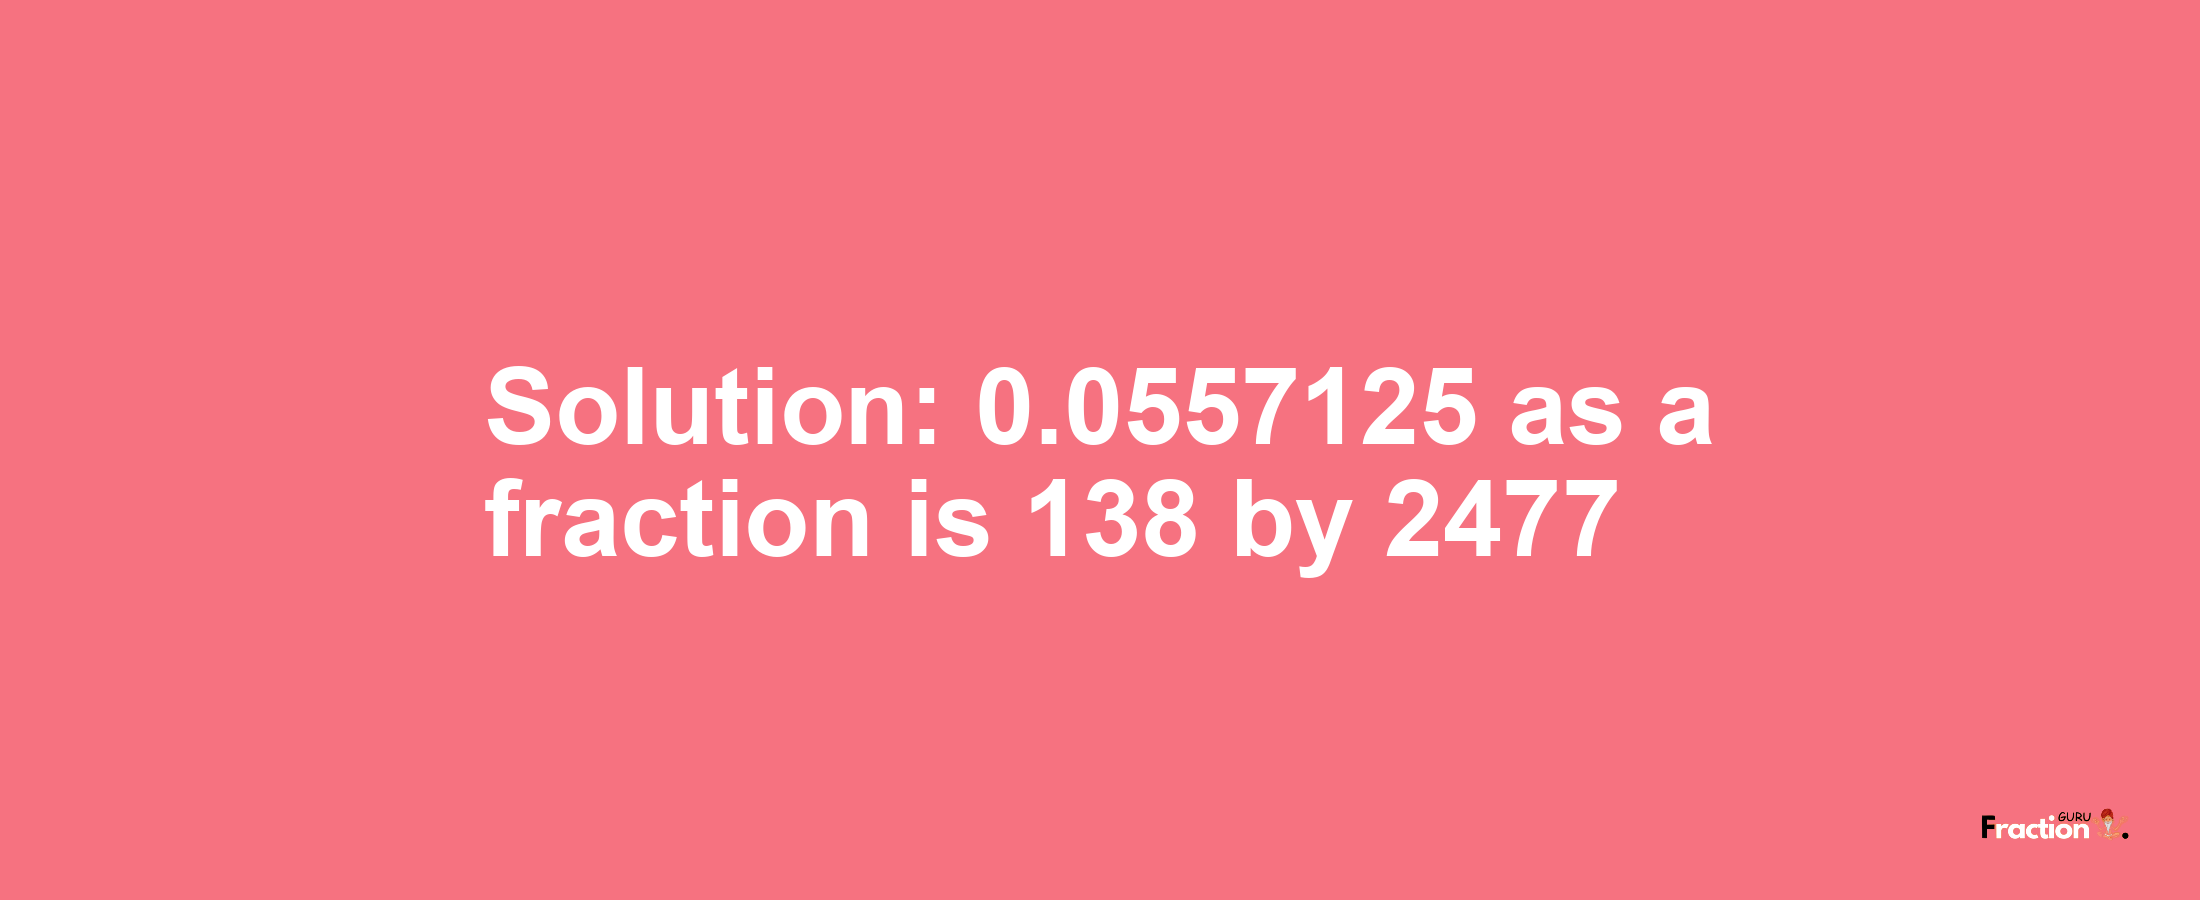 Solution:0.0557125 as a fraction is 138/2477